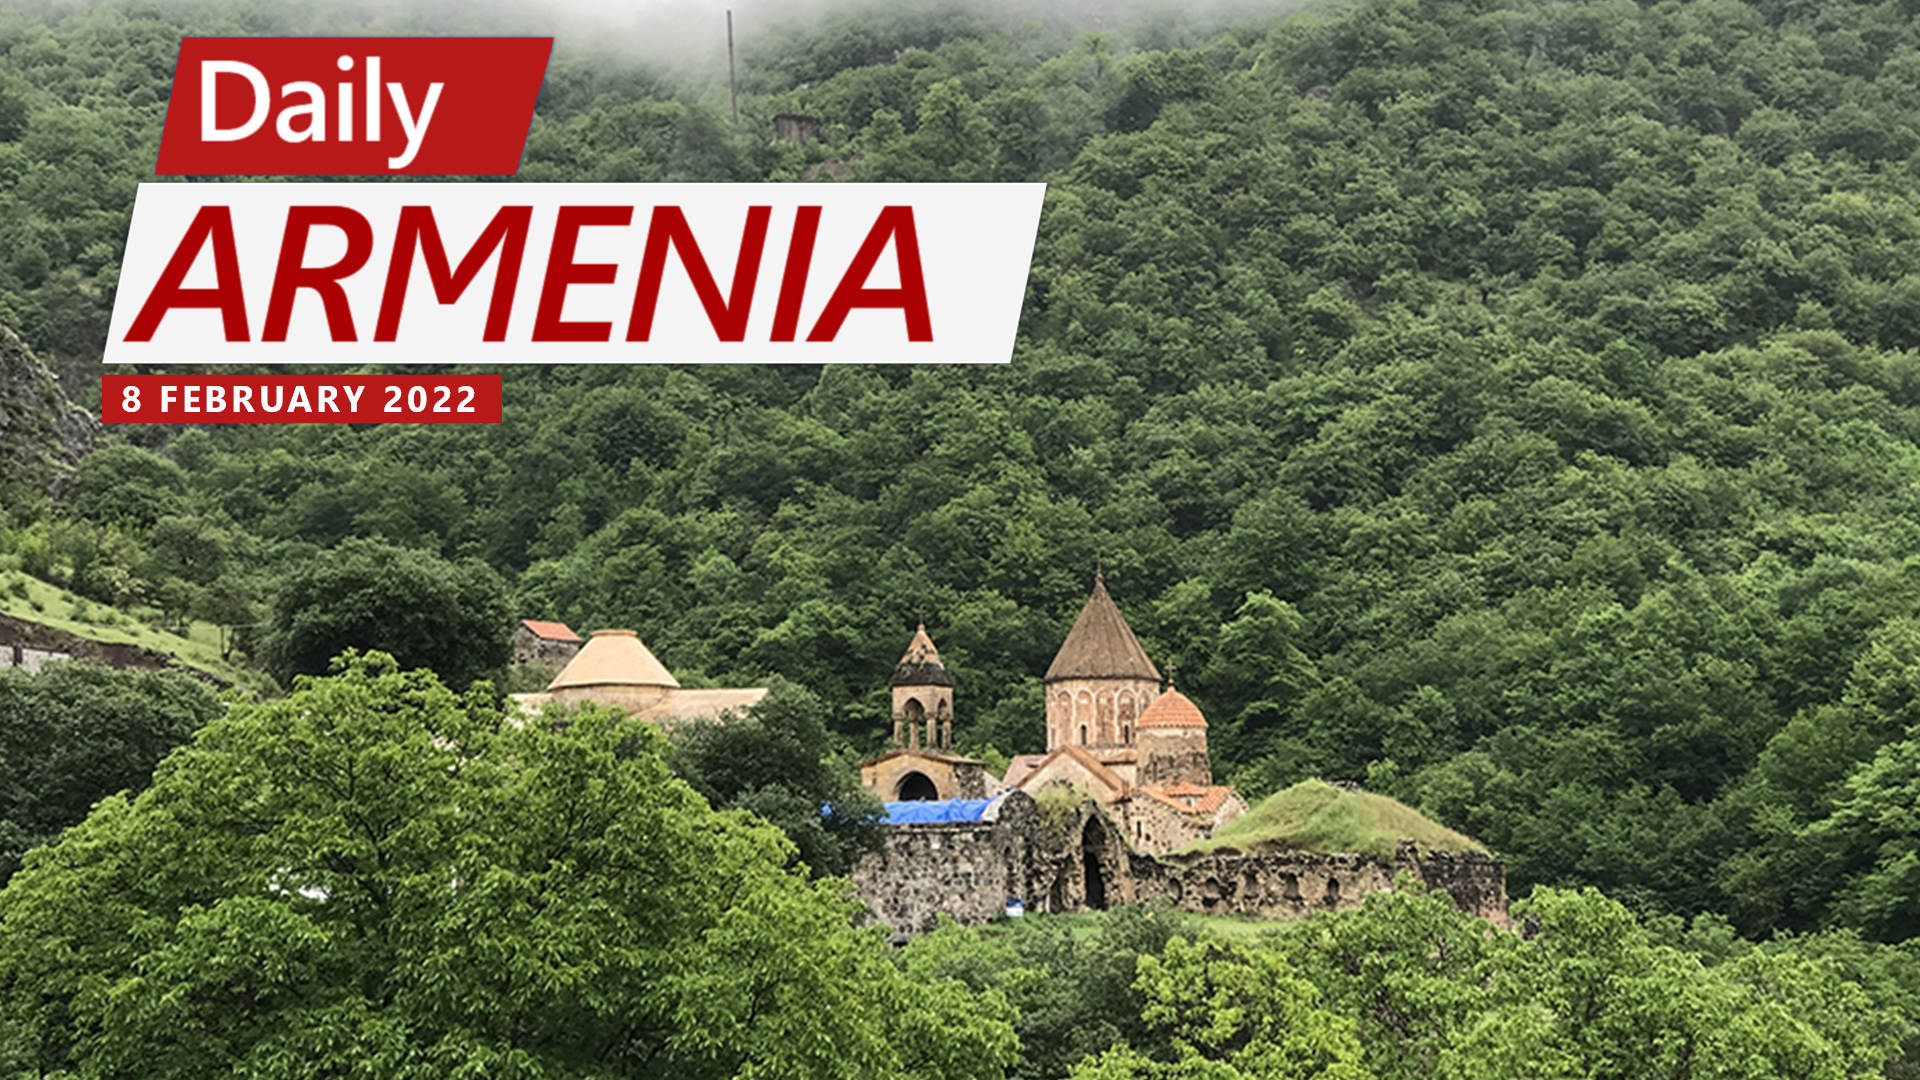 Armenia condemns Azerbaijan’s plans to remove “Armenian traces” from historical sites